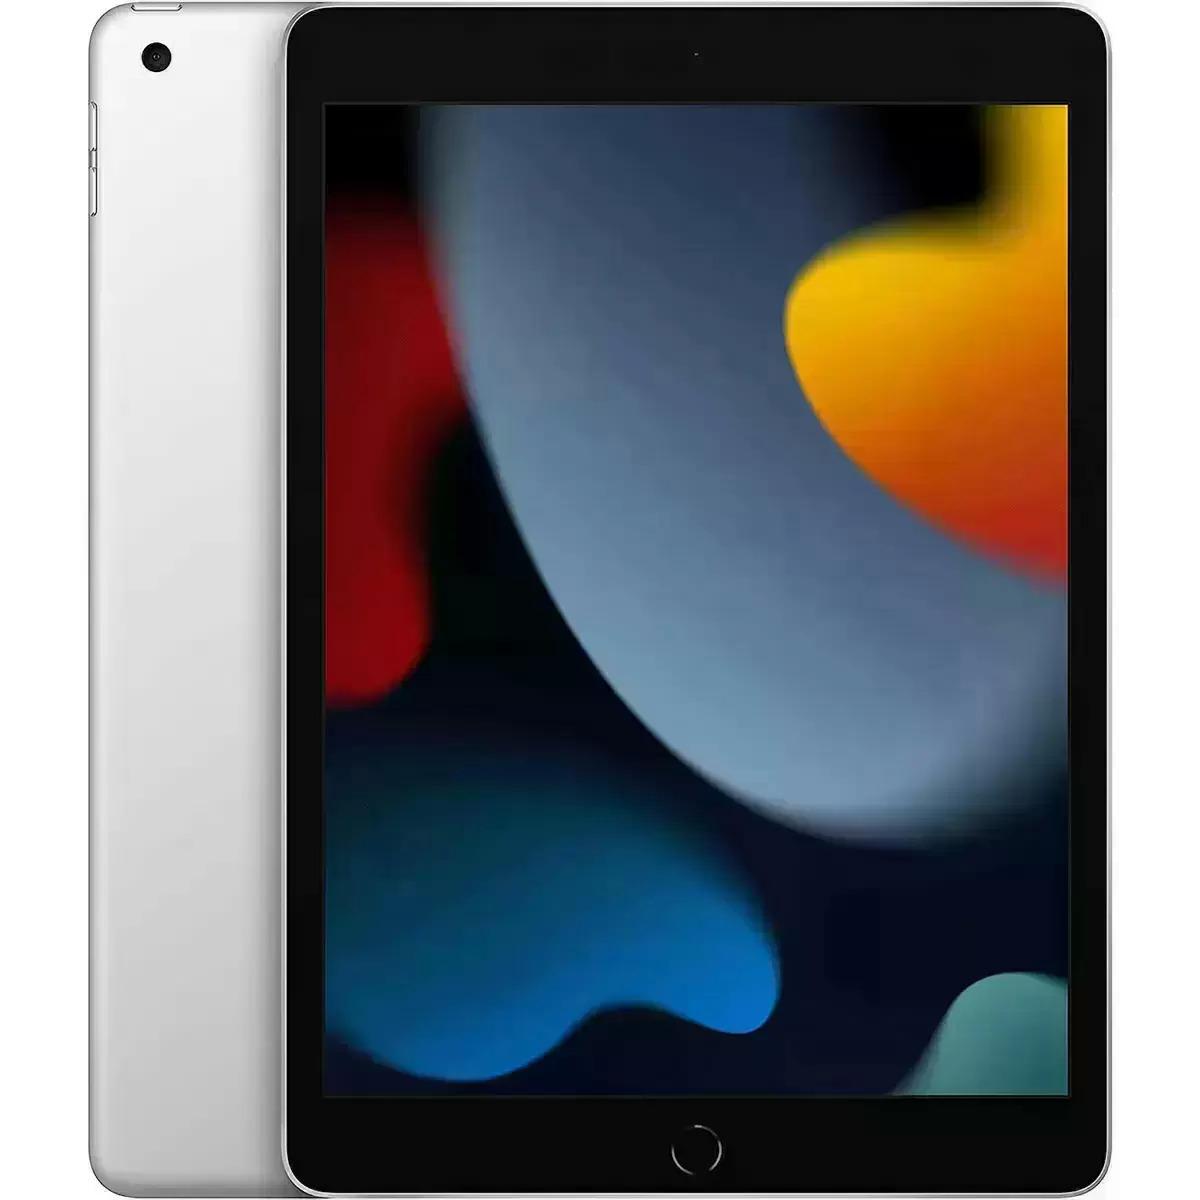 Apple iPad 9th Gen 64GB Wifi Tablet for $269.99 Shipped